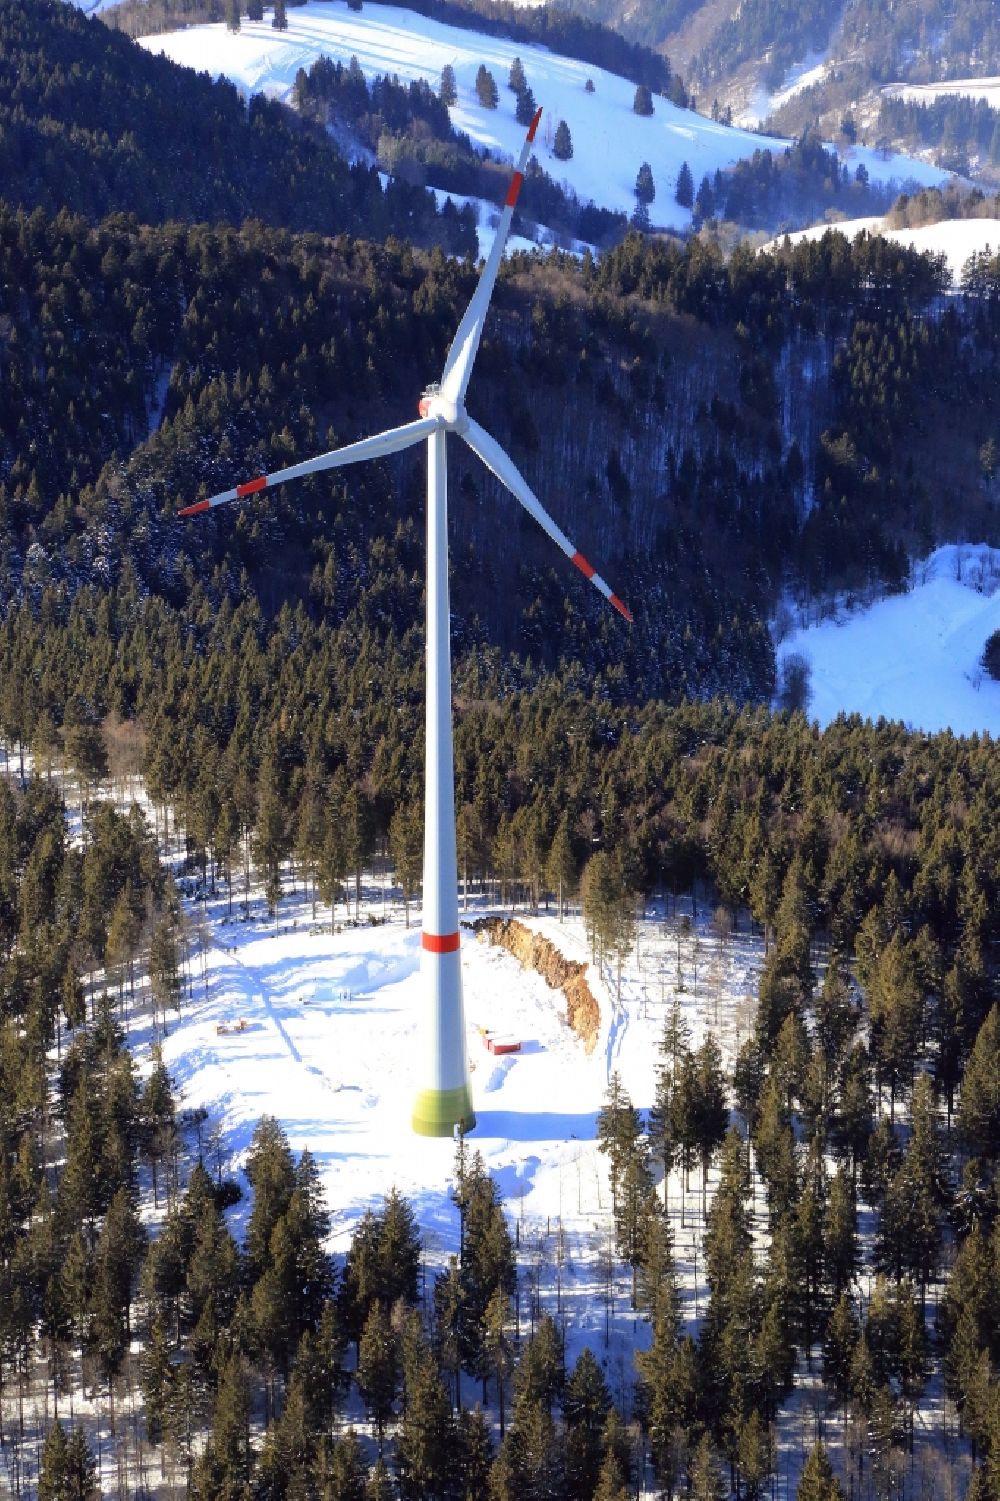 Aerial photograph Schopfheim - On the snow covered Rohrenkopf, the local mountain of Gersbach, a district of Schopfheim in Baden-Wuerttemberg, wind turbines have started operation. It is the first wind farm in the south of the Black Forest